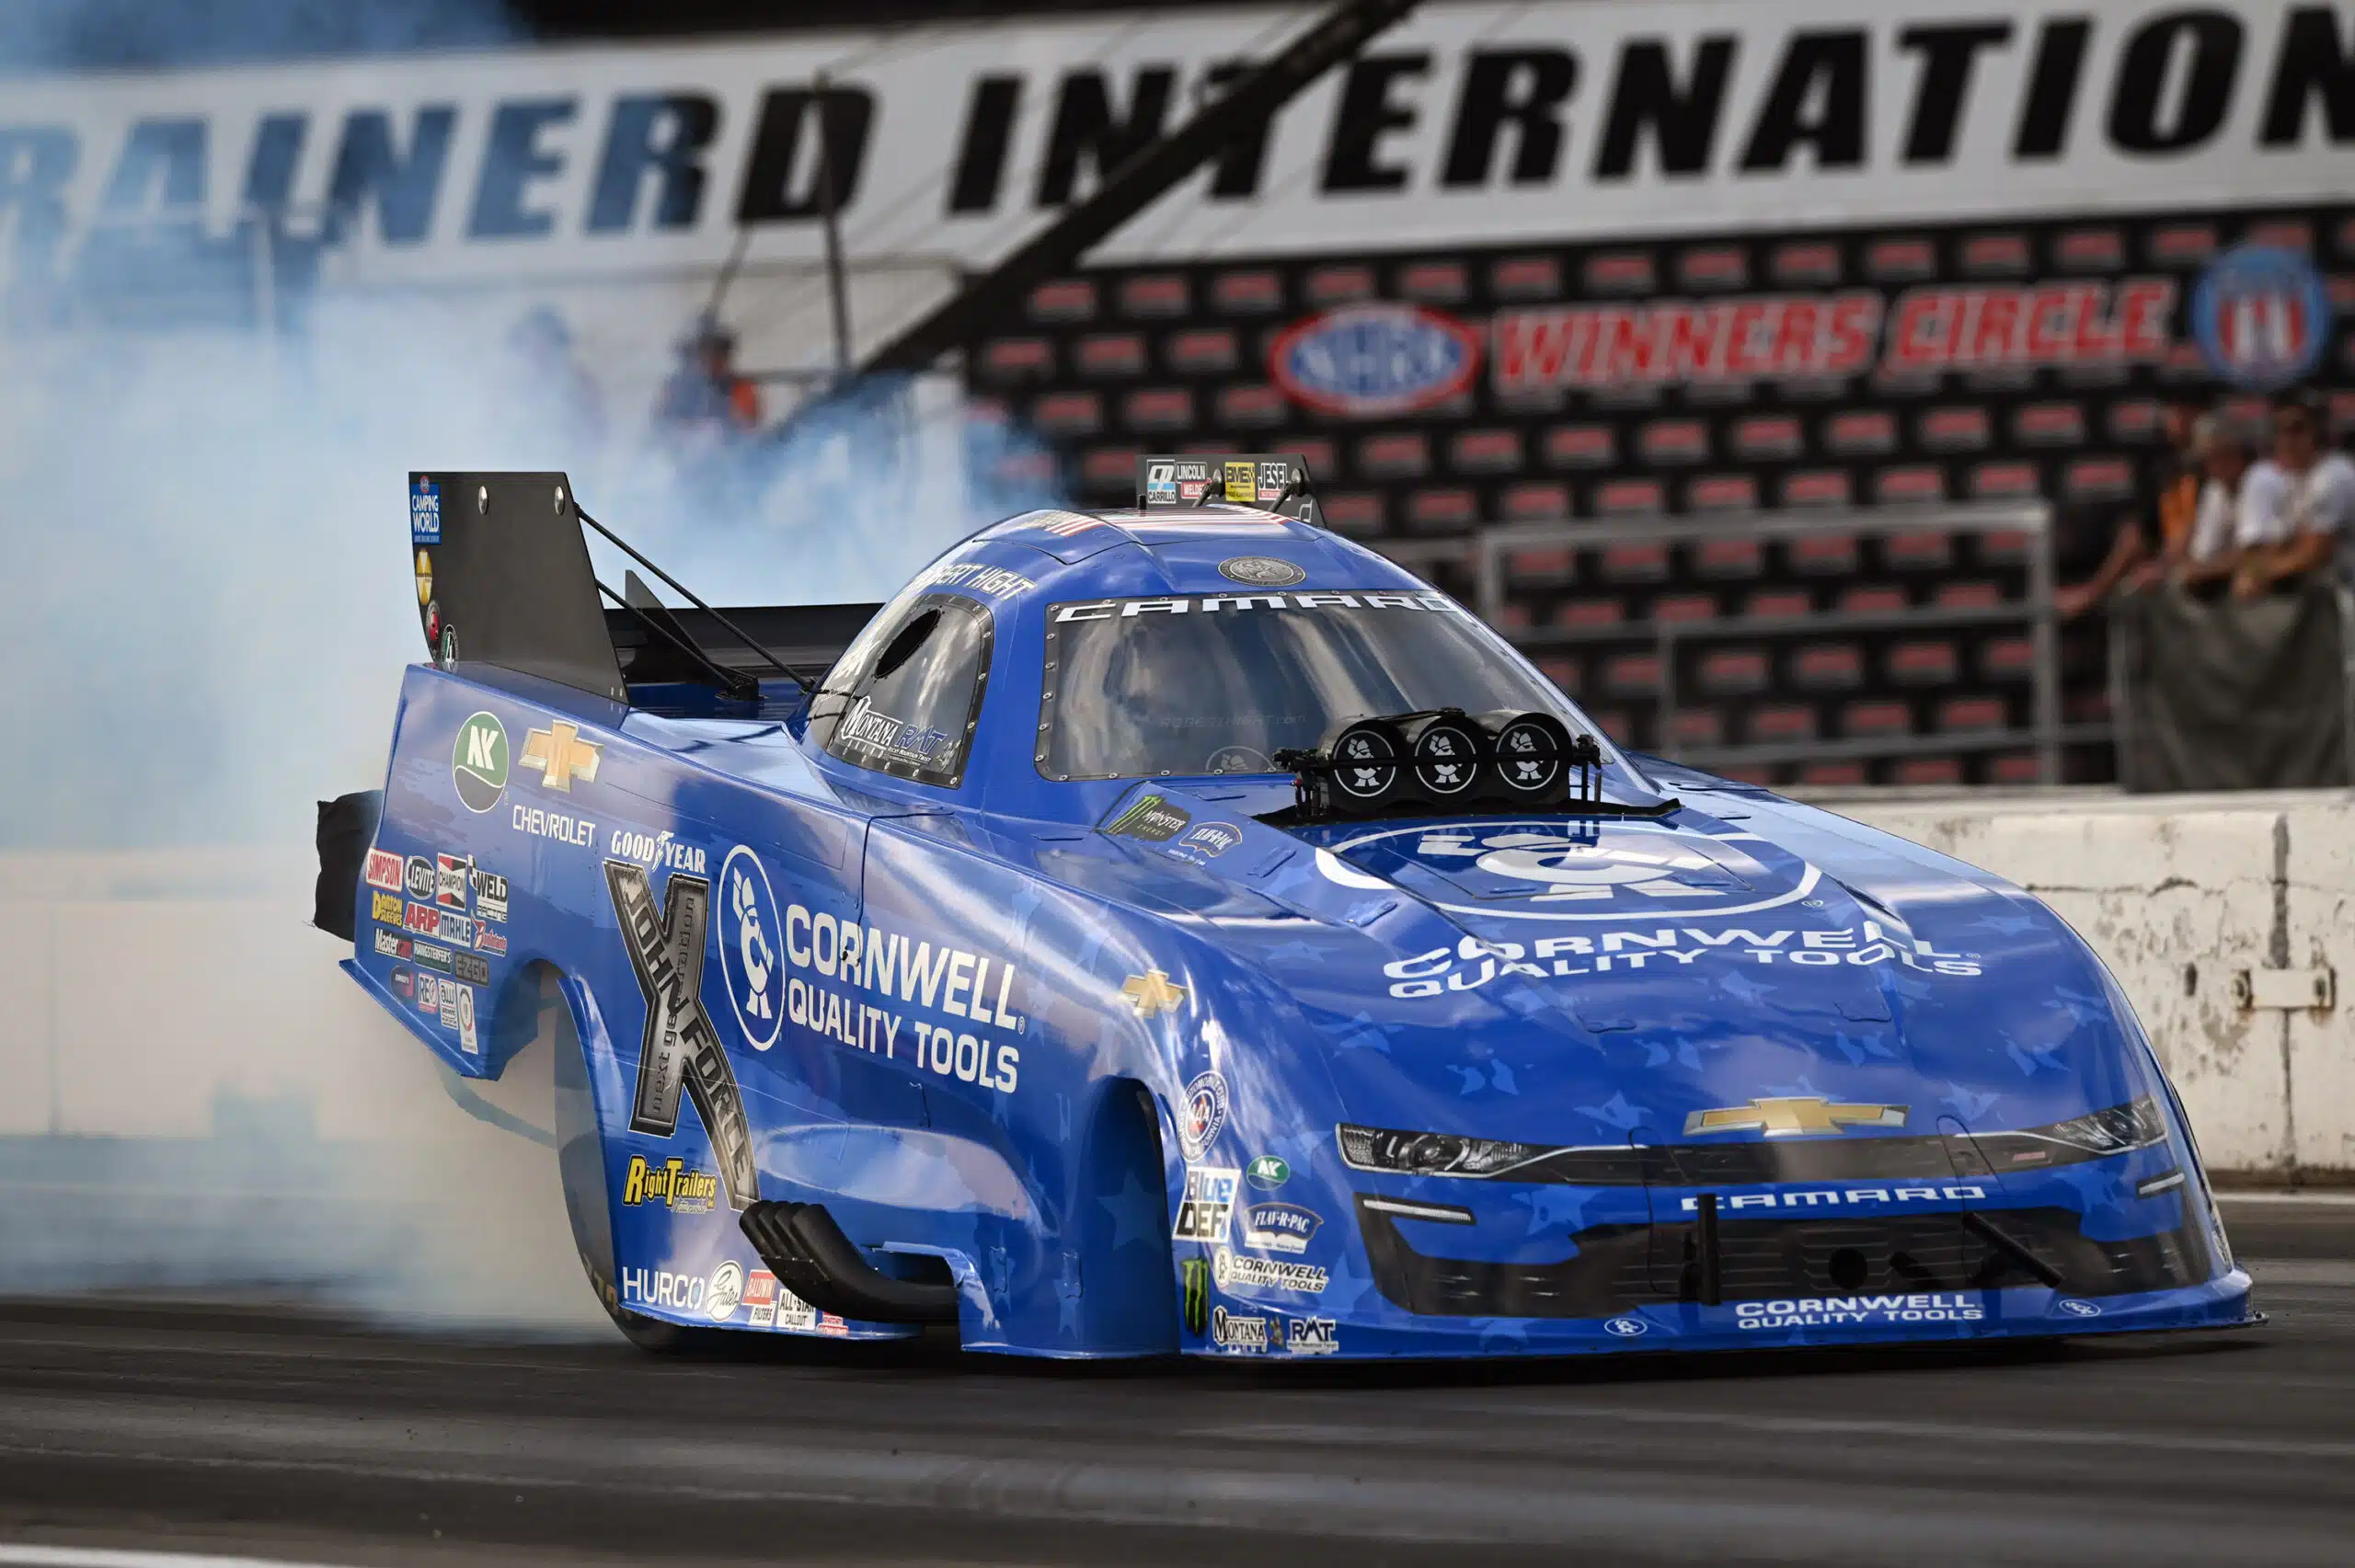 JOHN FORCE RACING: ROBERT HIGHT, CORNWELL TOOLS READY FOR US NATIONALS